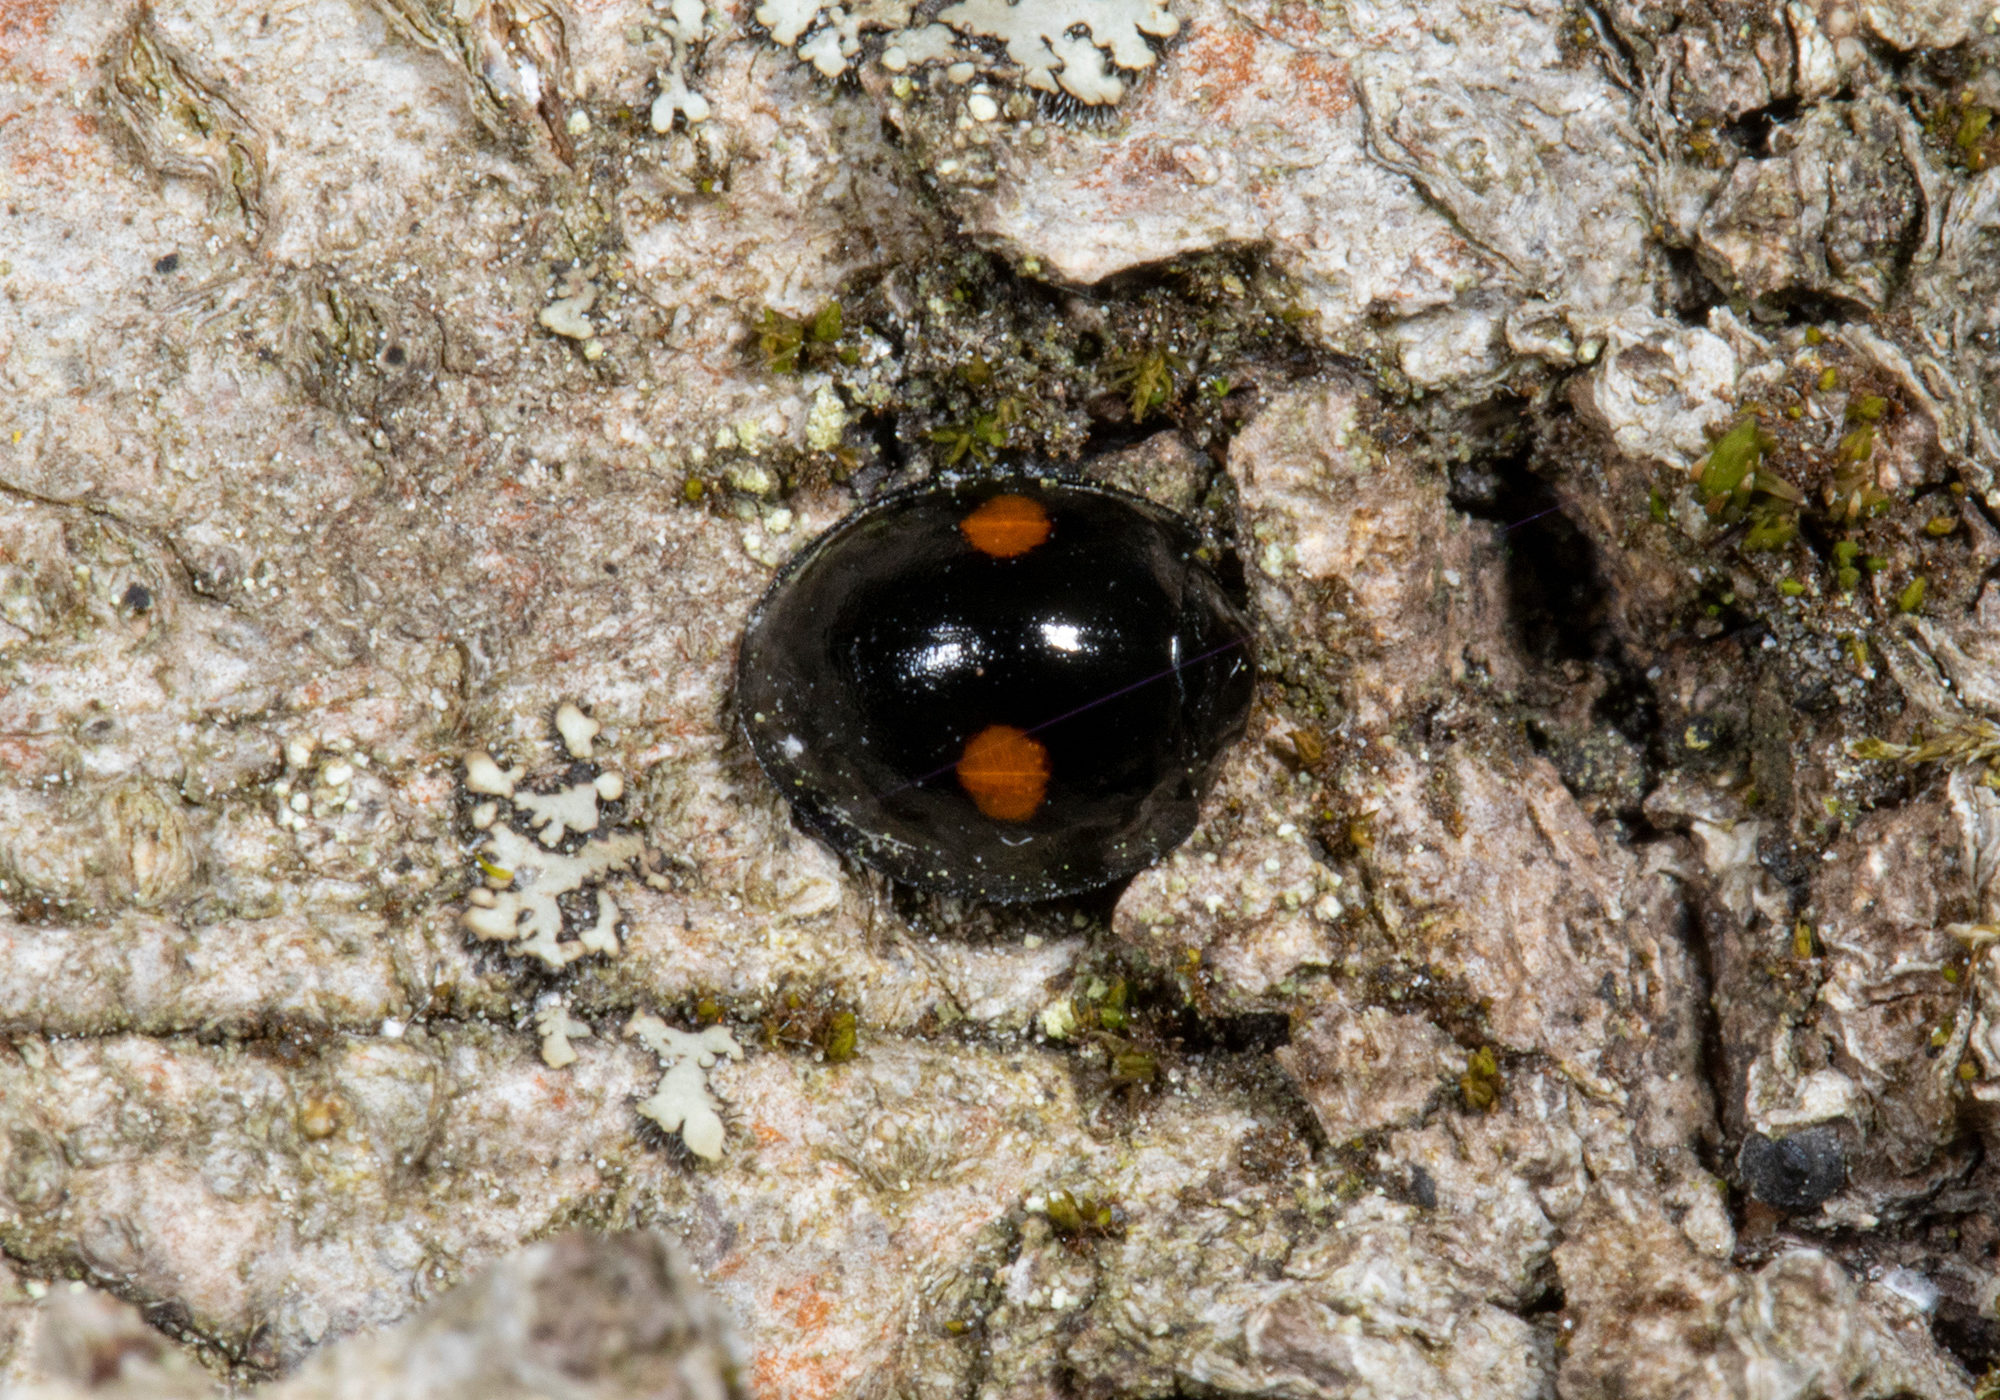 Twice-stabbed Lady Beetle (Chilocorus stigma) on an American Beech trunk. K.P. McFarland licensed under CC-BY-NC